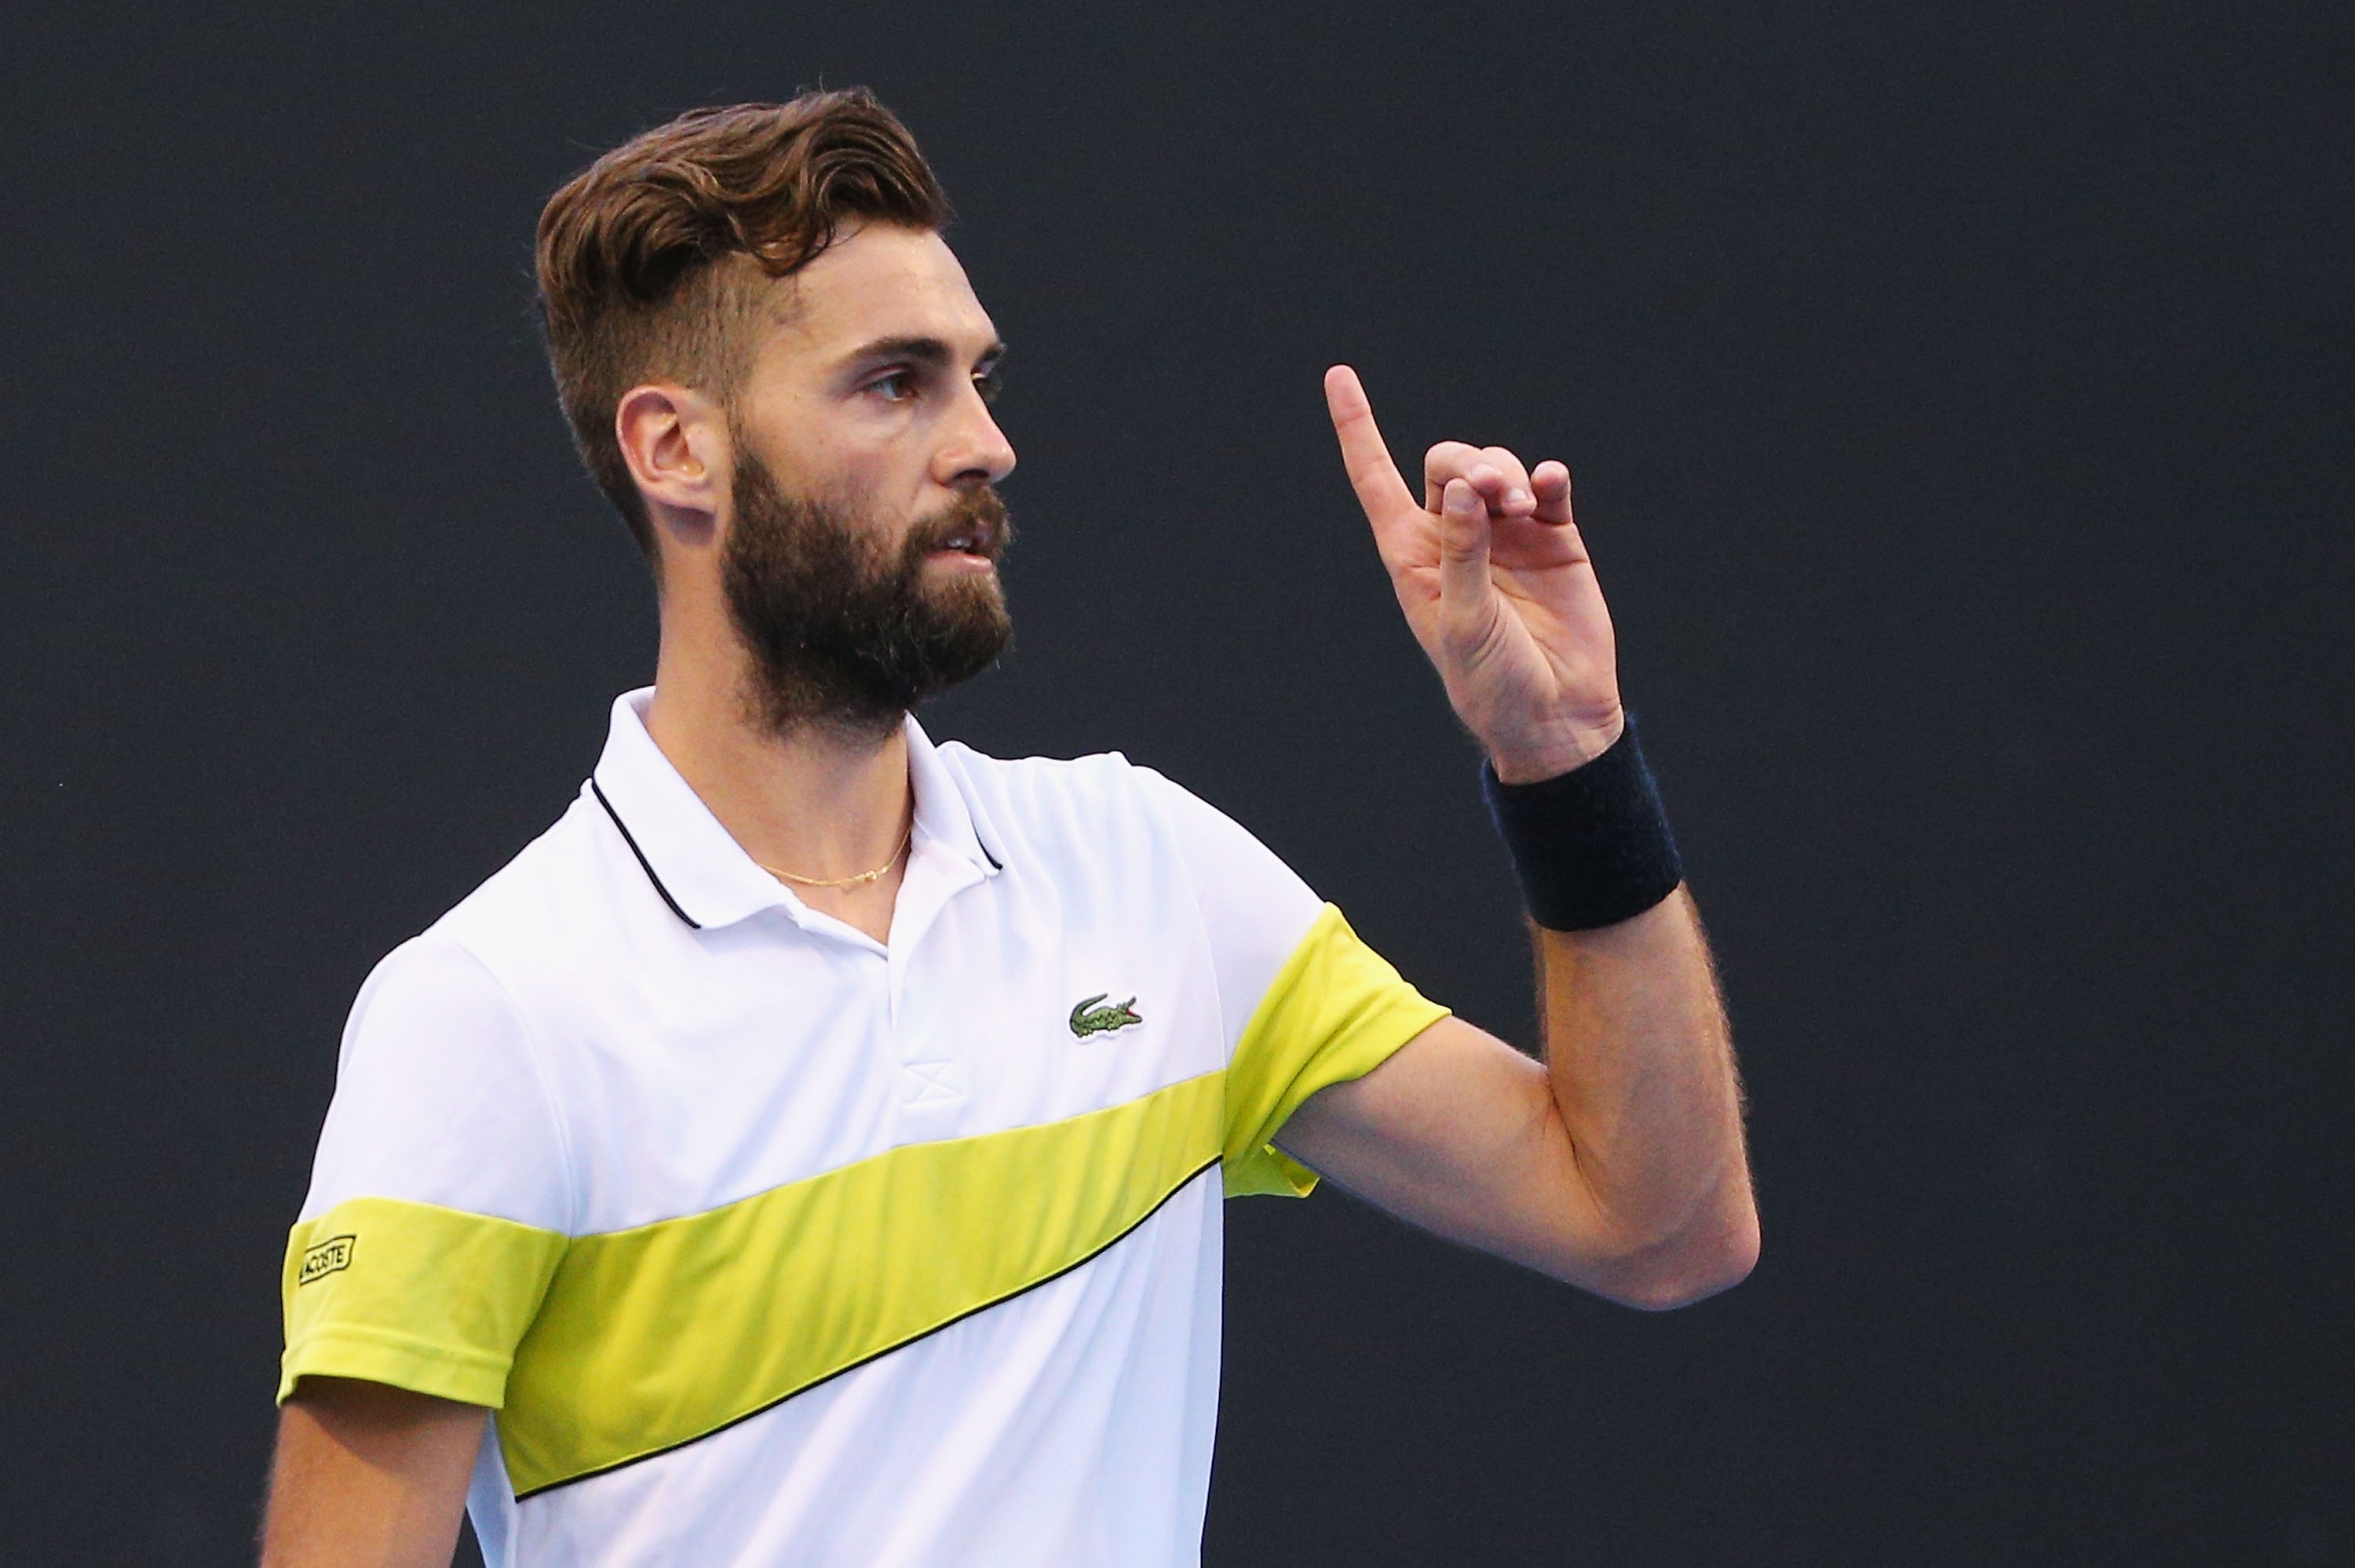 MELBOURNE, AUSTRALIA - JANUARY 17: Benoit Paire of France challaenges a line call in his first round match against Tommy Haas of Germany on day two of the 2017 Australian Open at Melbourne Park on January 17, 2017 in Melbourne, Australia. (Photo by Michael Dodge/Getty Images)